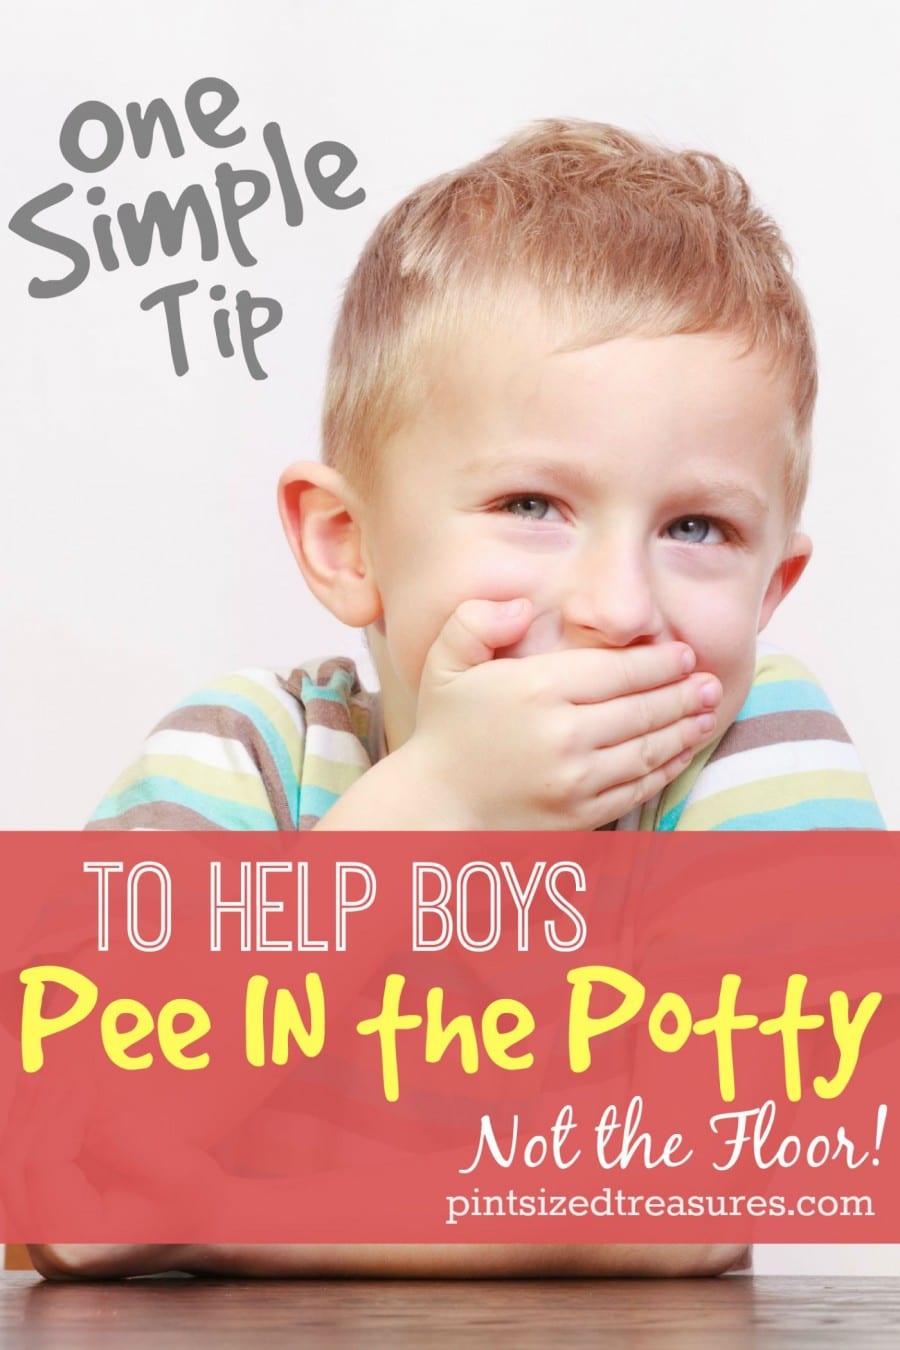 one tip to help boys pee in the potty